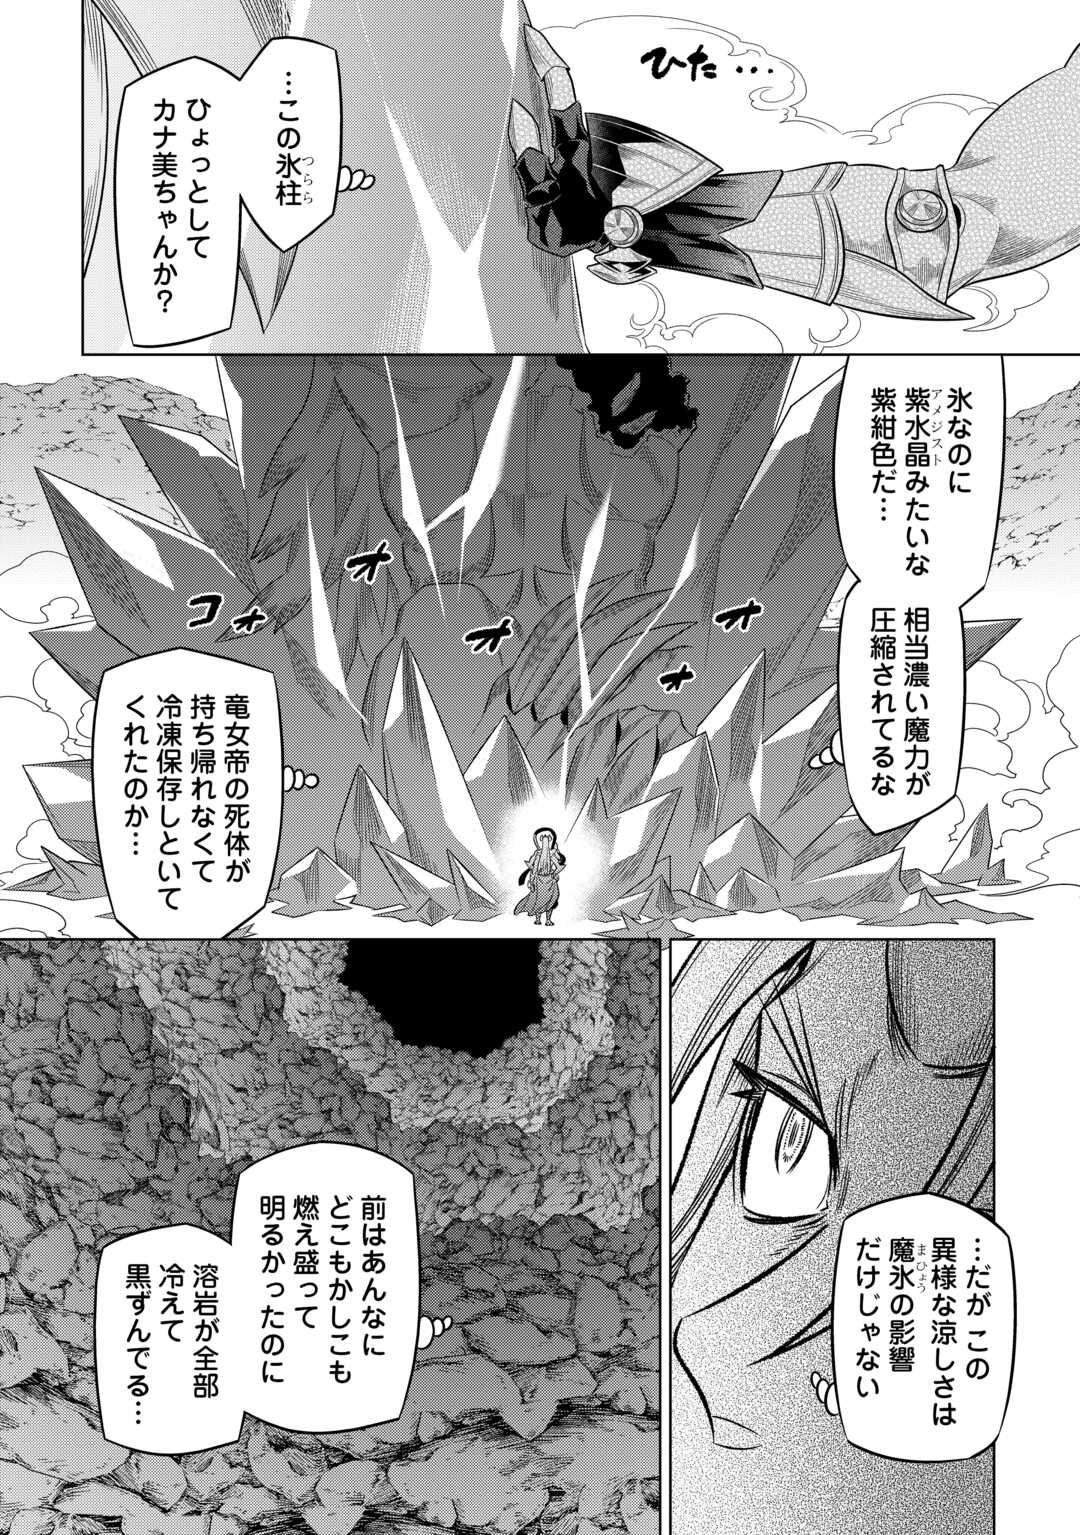 Re:Monster - Chapter 100 - Page 2